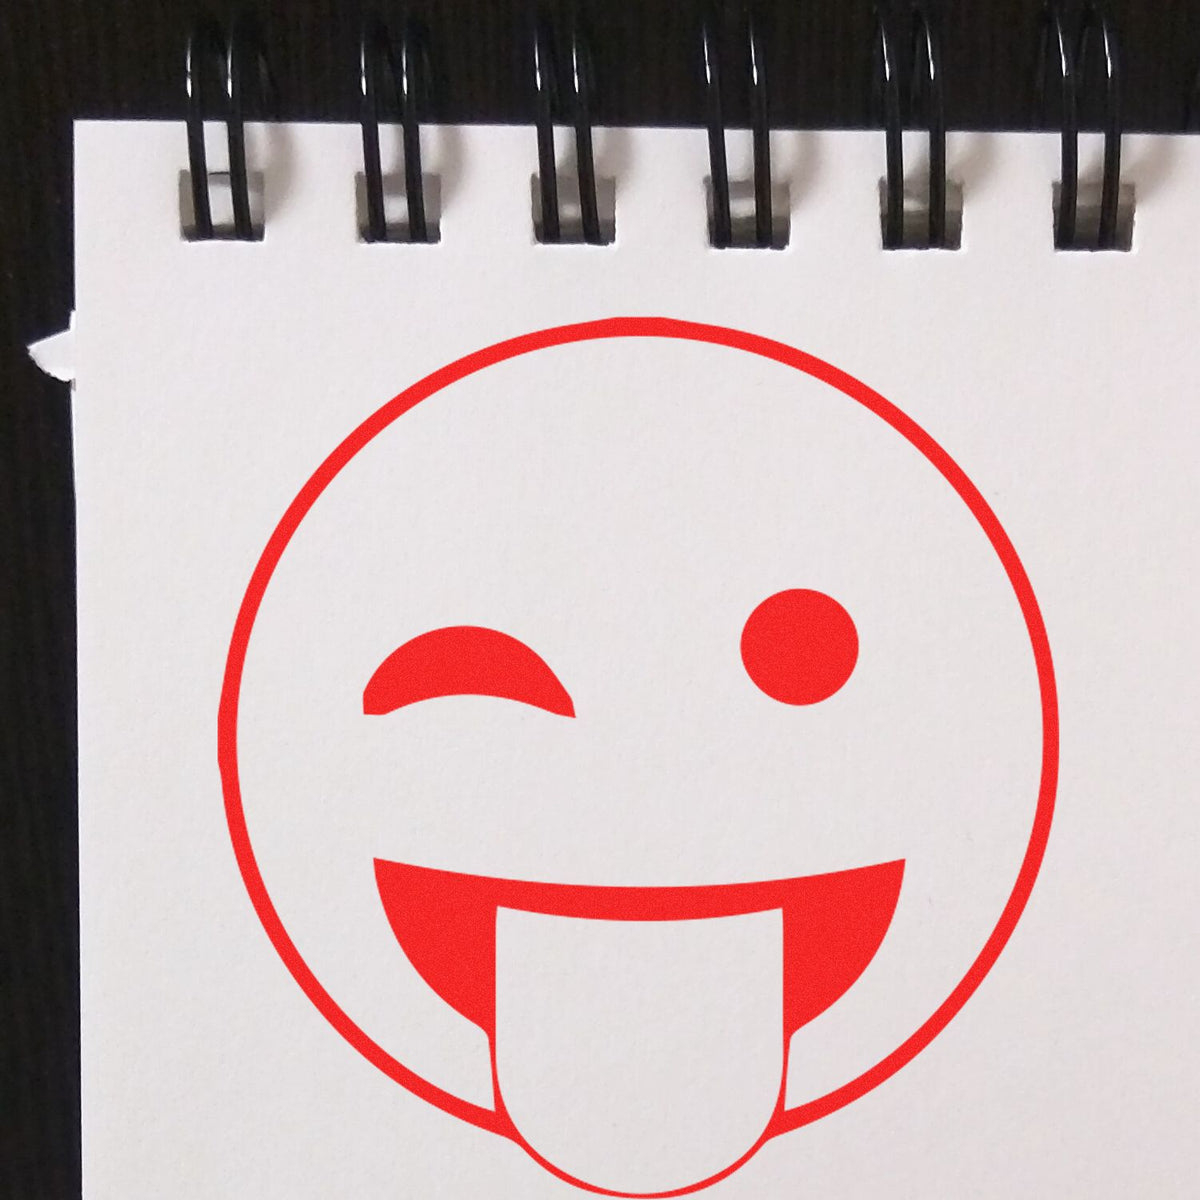 Self-Inking Round Tongue out smiley Stamp In Use Photo